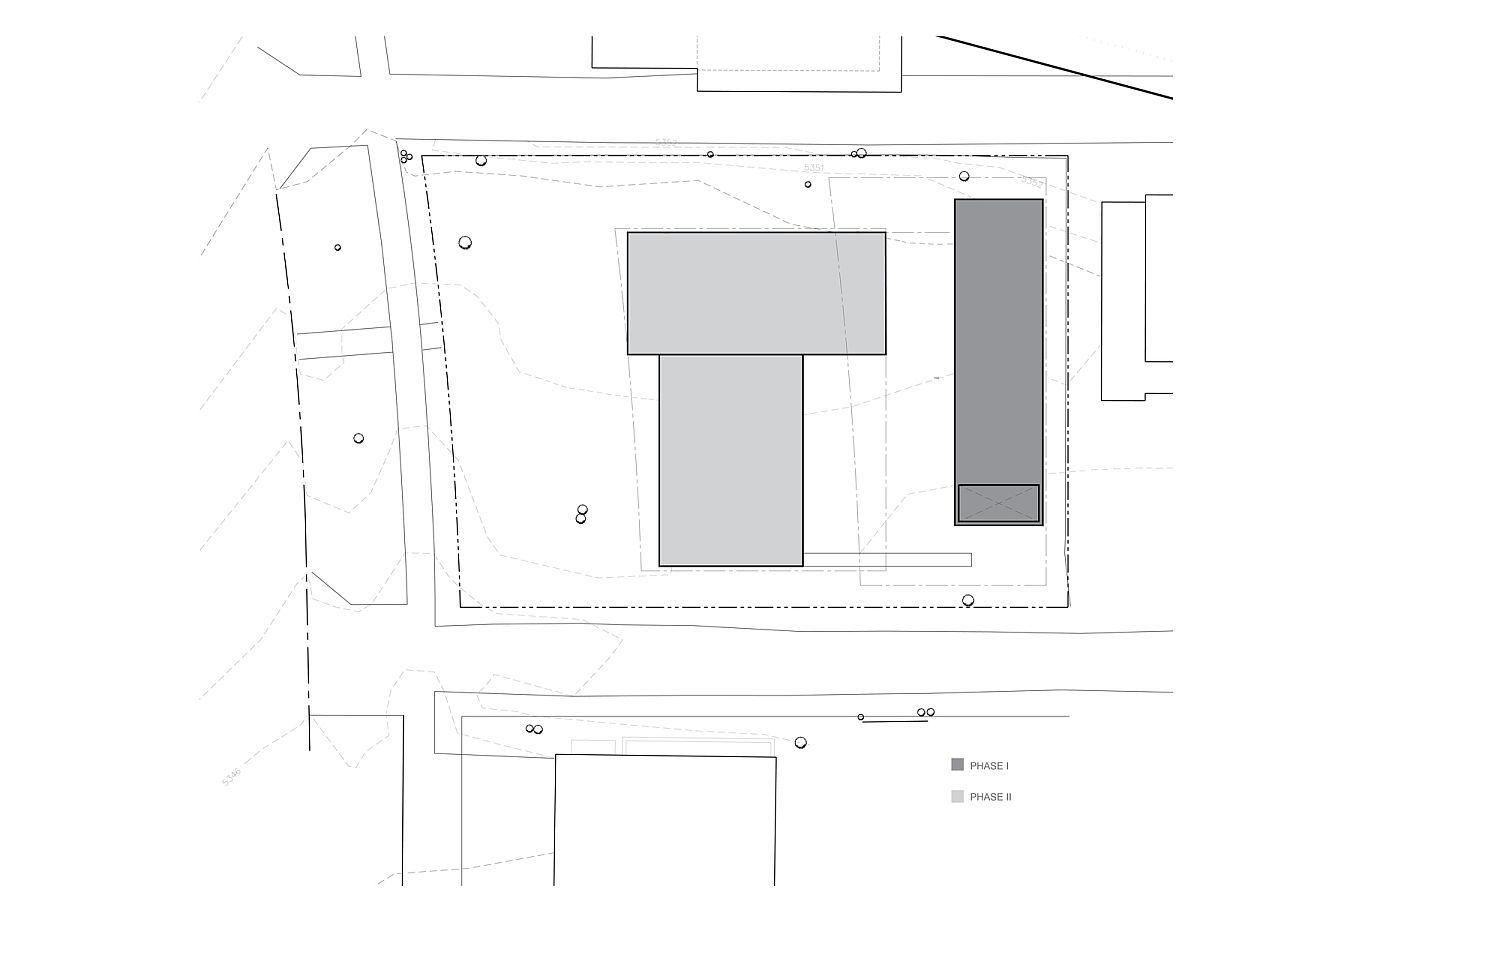 Site plan of Space Pod